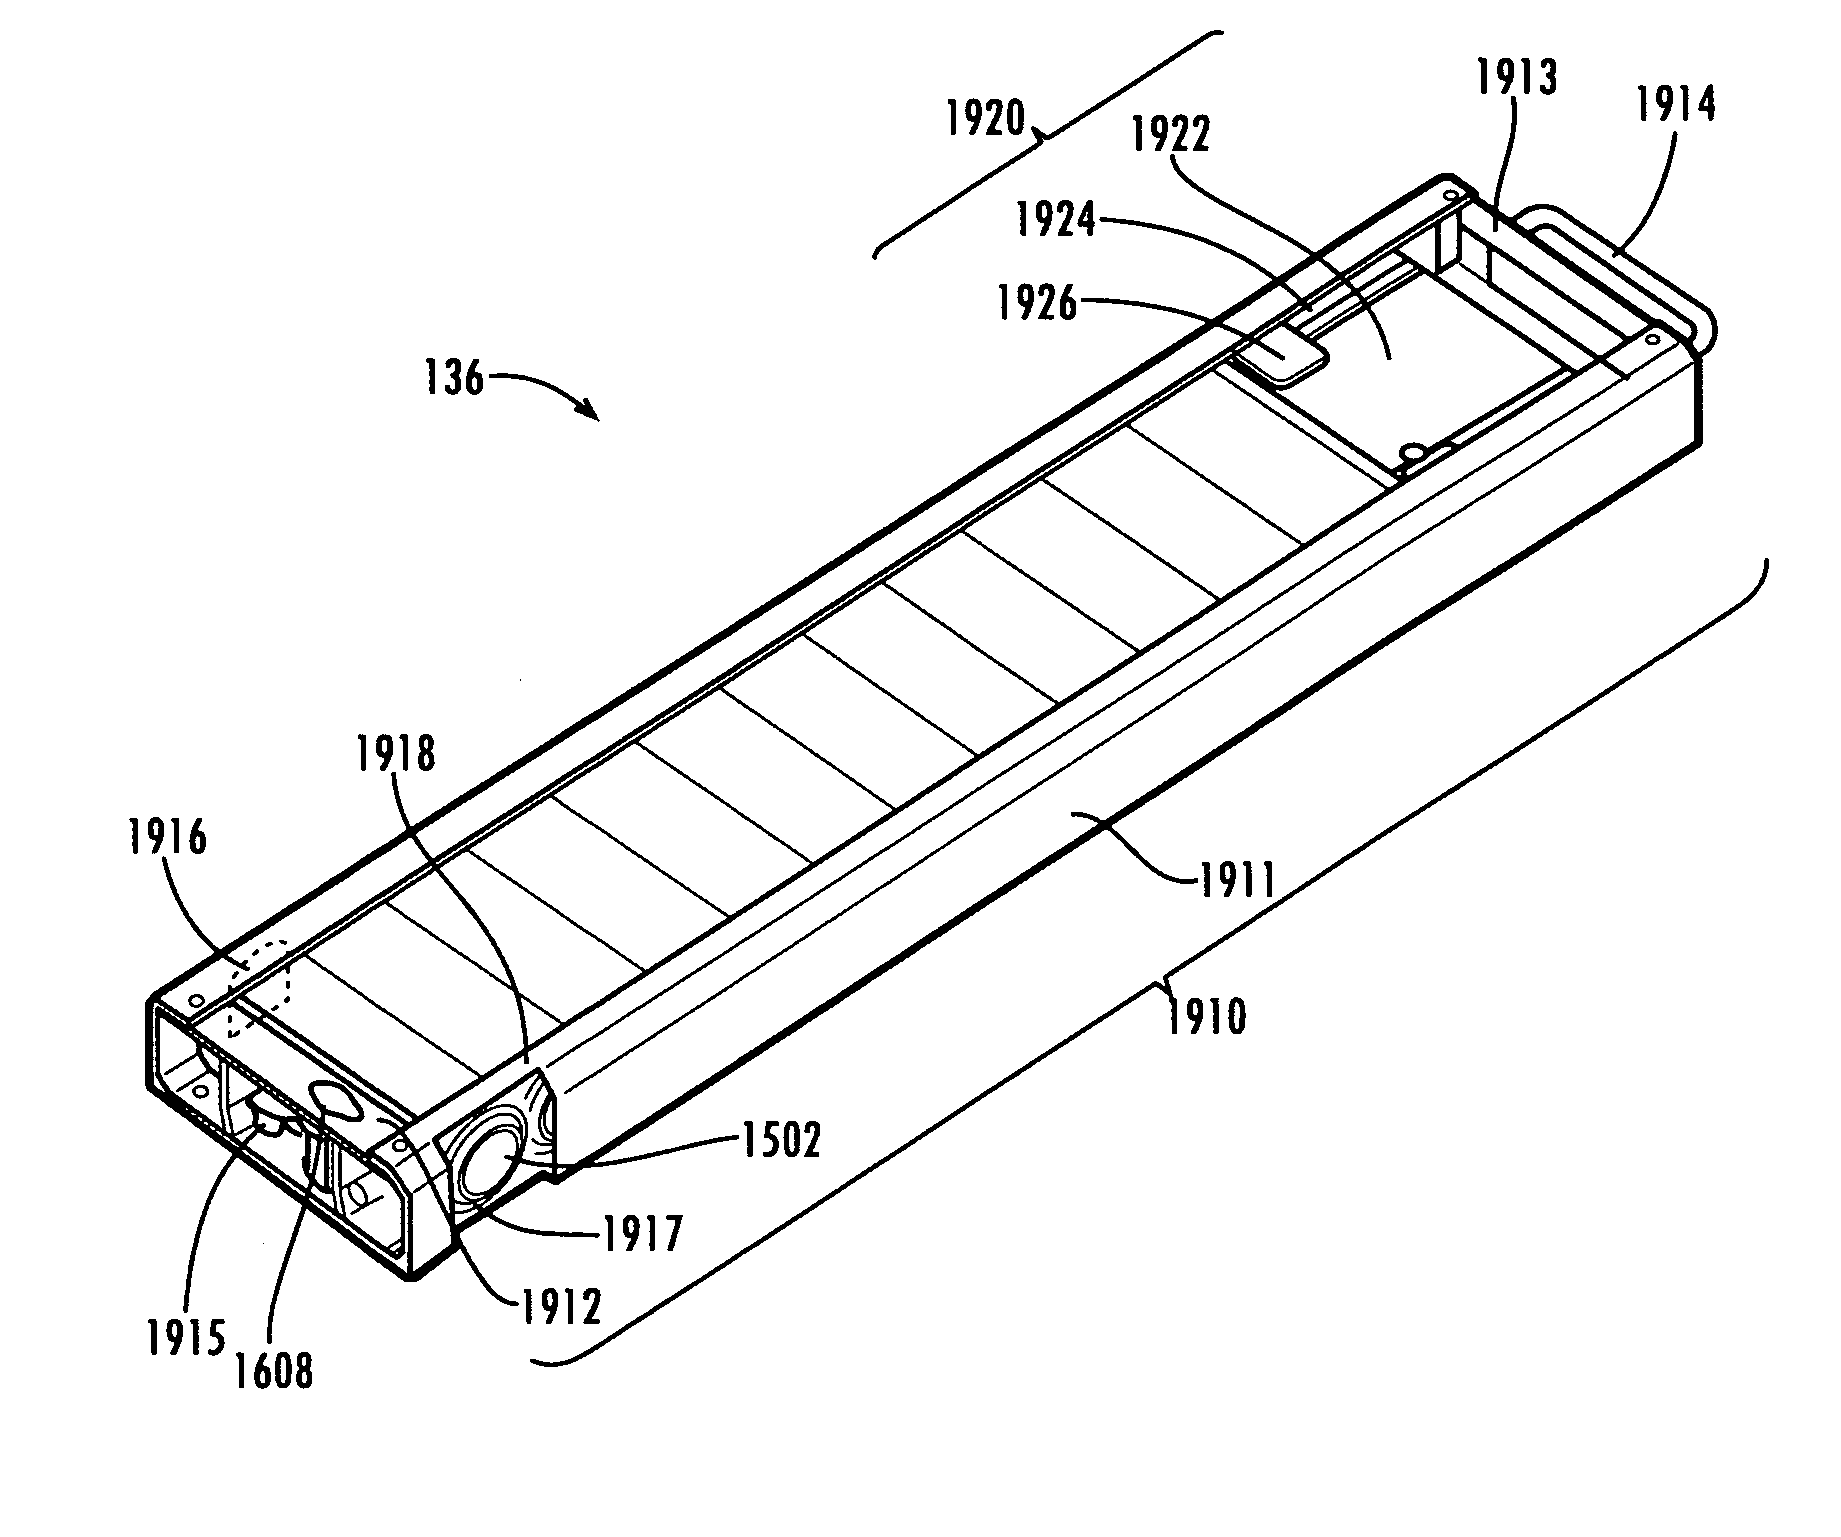 Cartridge ejection and data acquisition system